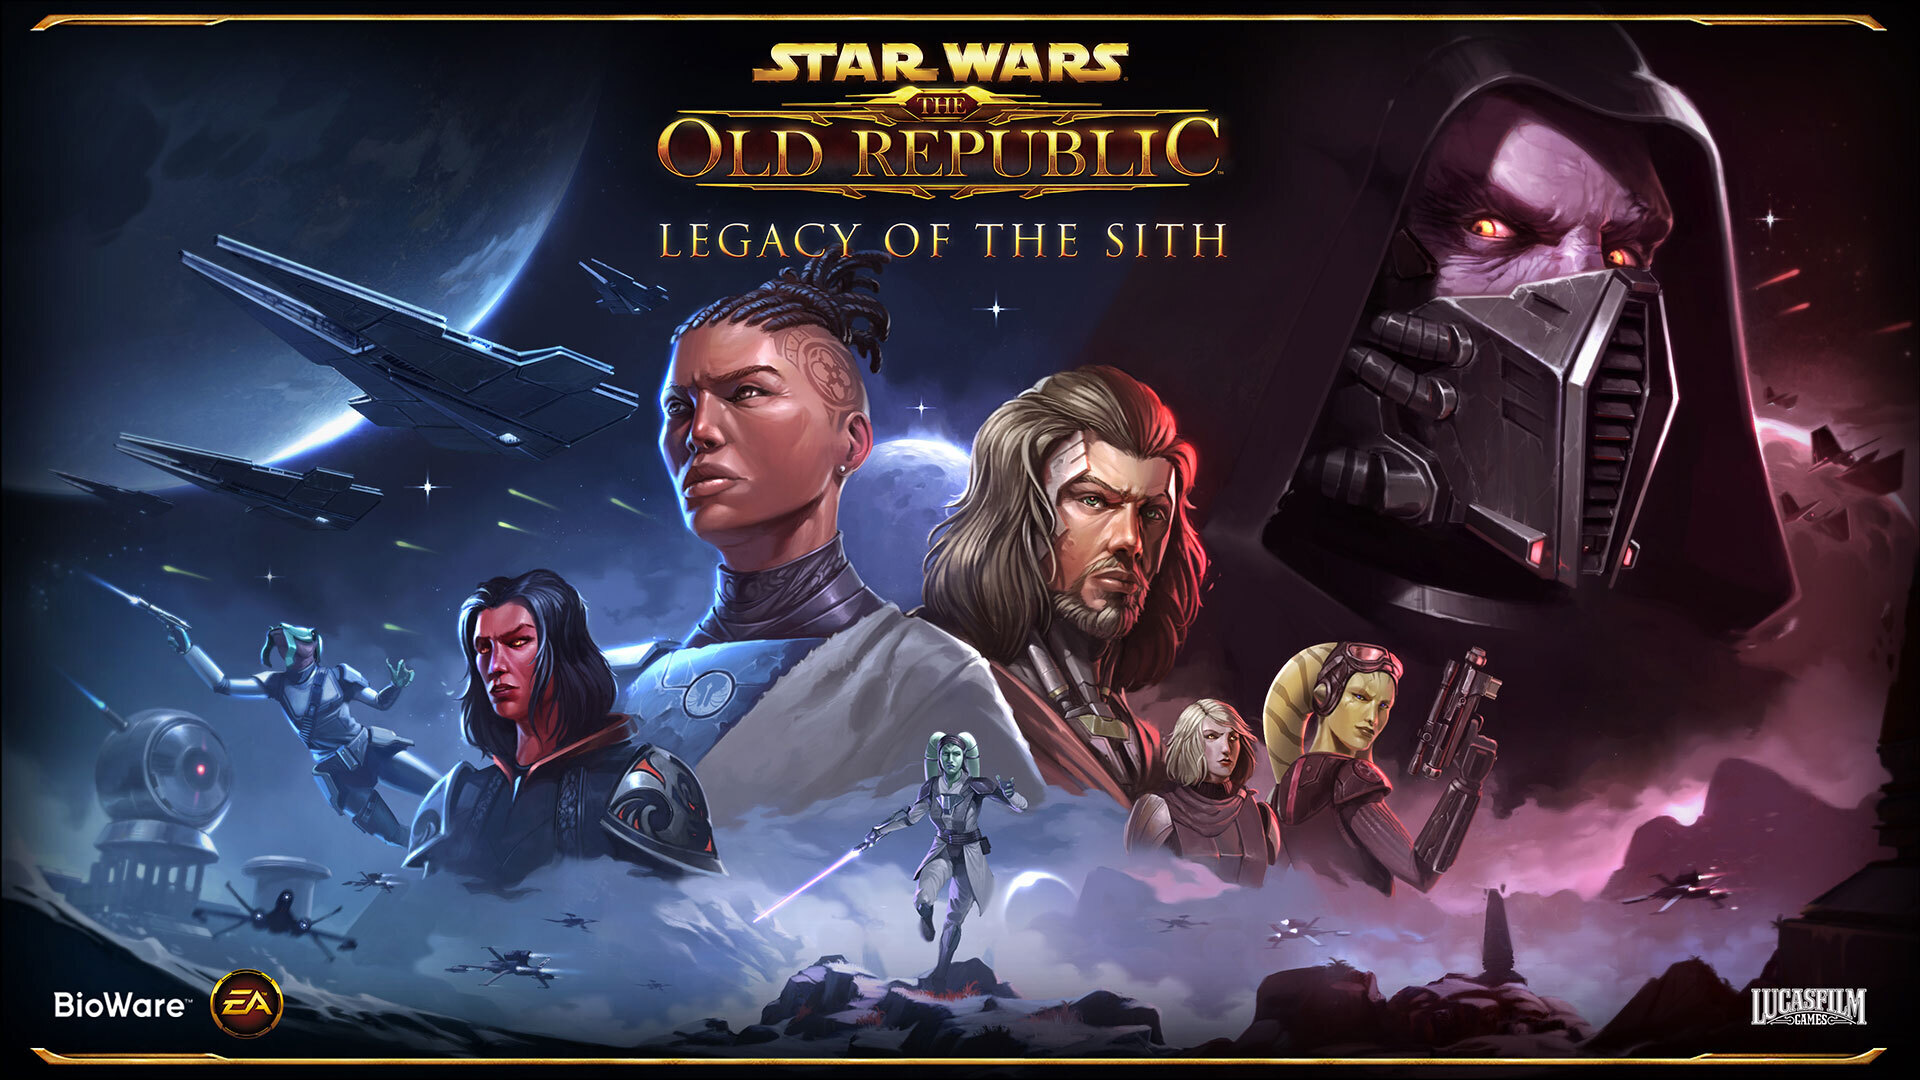 The Old Republic Wars: The Old Republic of the Sith is live! This new expansion brings a new storyline, planet, Flashpoint, Galactic Seasons, and more! More information